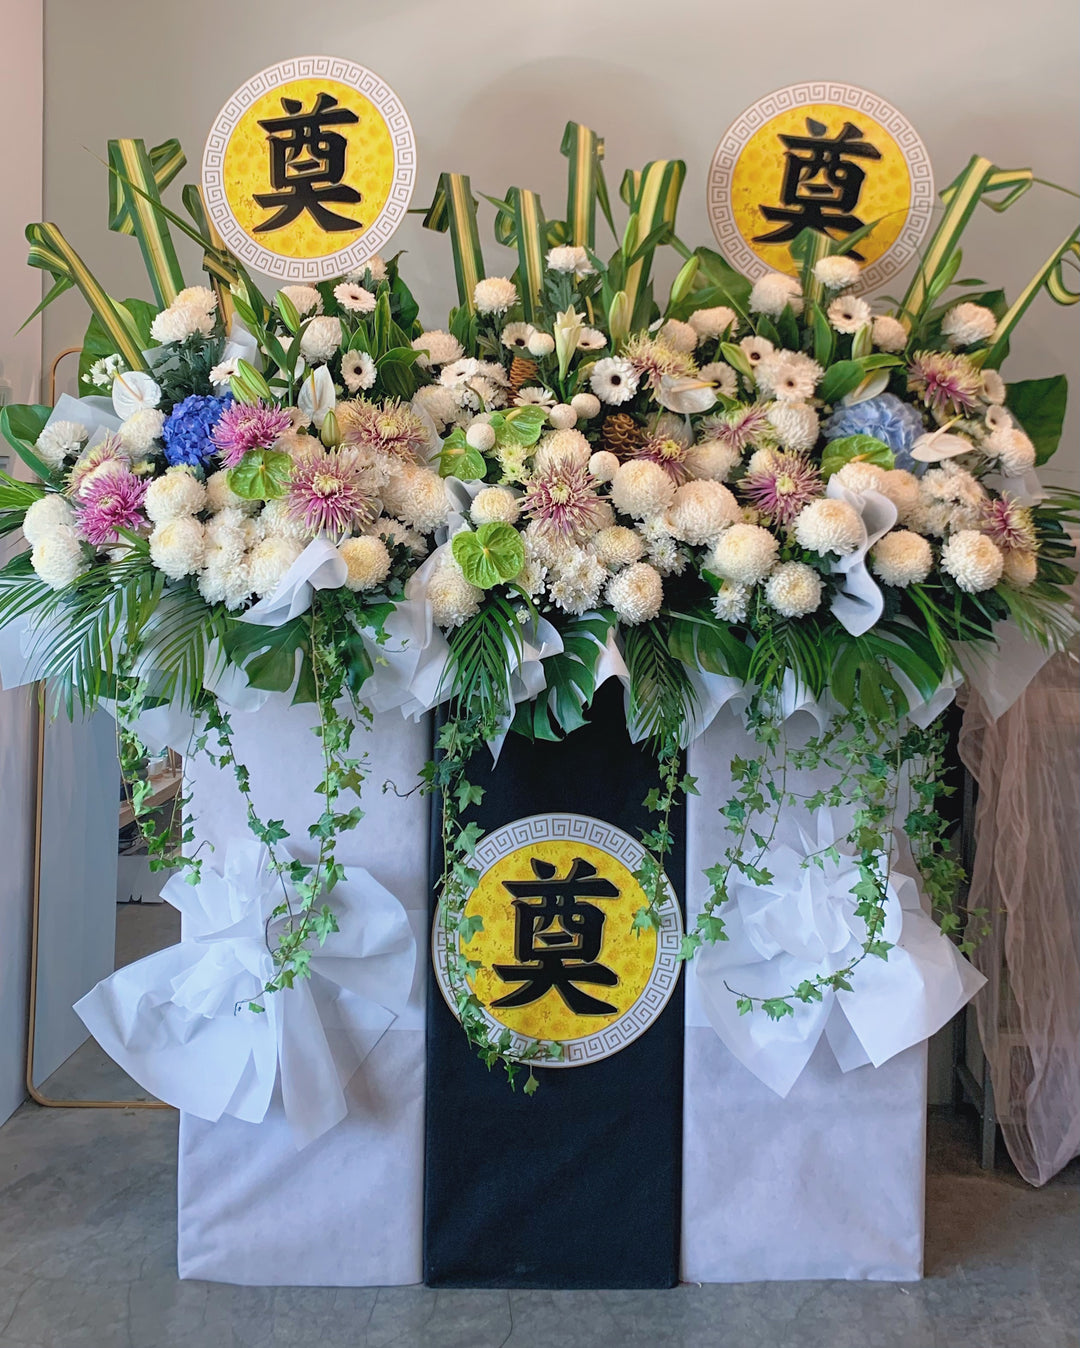 Featuring the season of the best condolences flowers to honor the deceased and shine to lift spirits up. For same day condolences flowers delivery in Butterworth